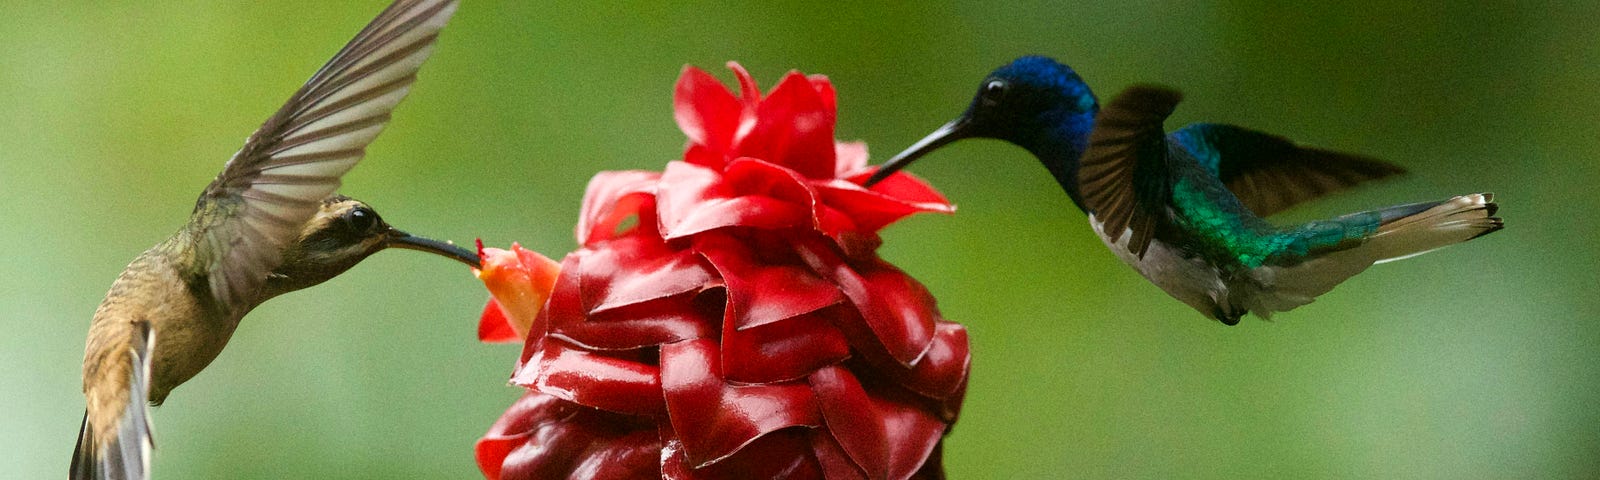 two hummingbirds feeding on a red flower